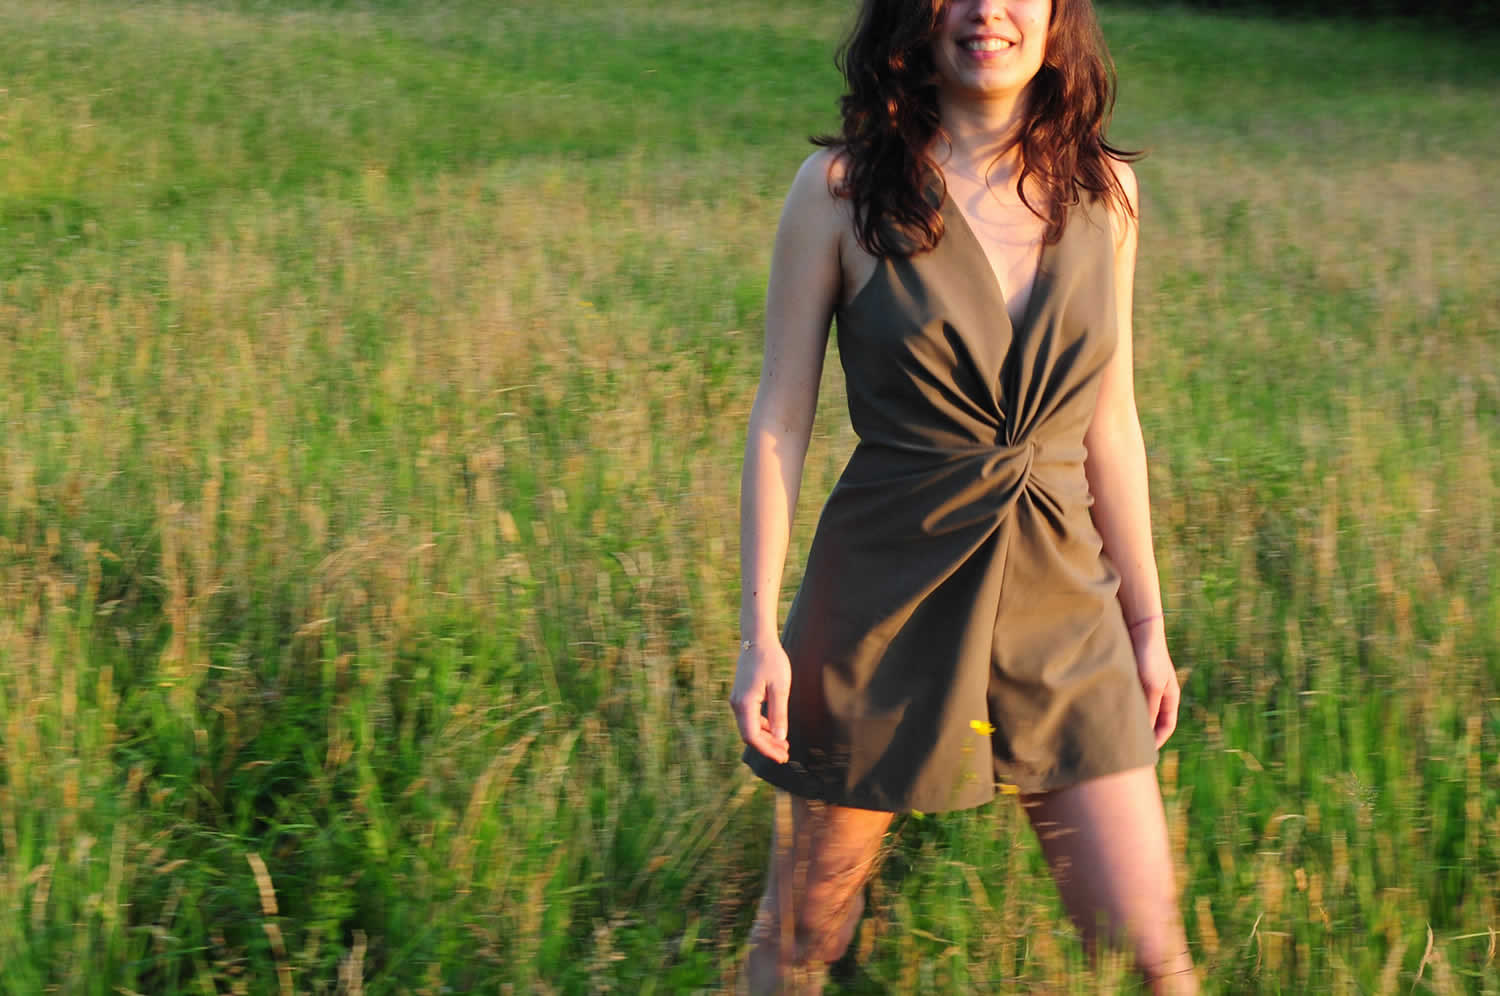 ladulsatina Sewing and DIY fashion blog: leather jacket and playsuit - army green playsuit with central draping